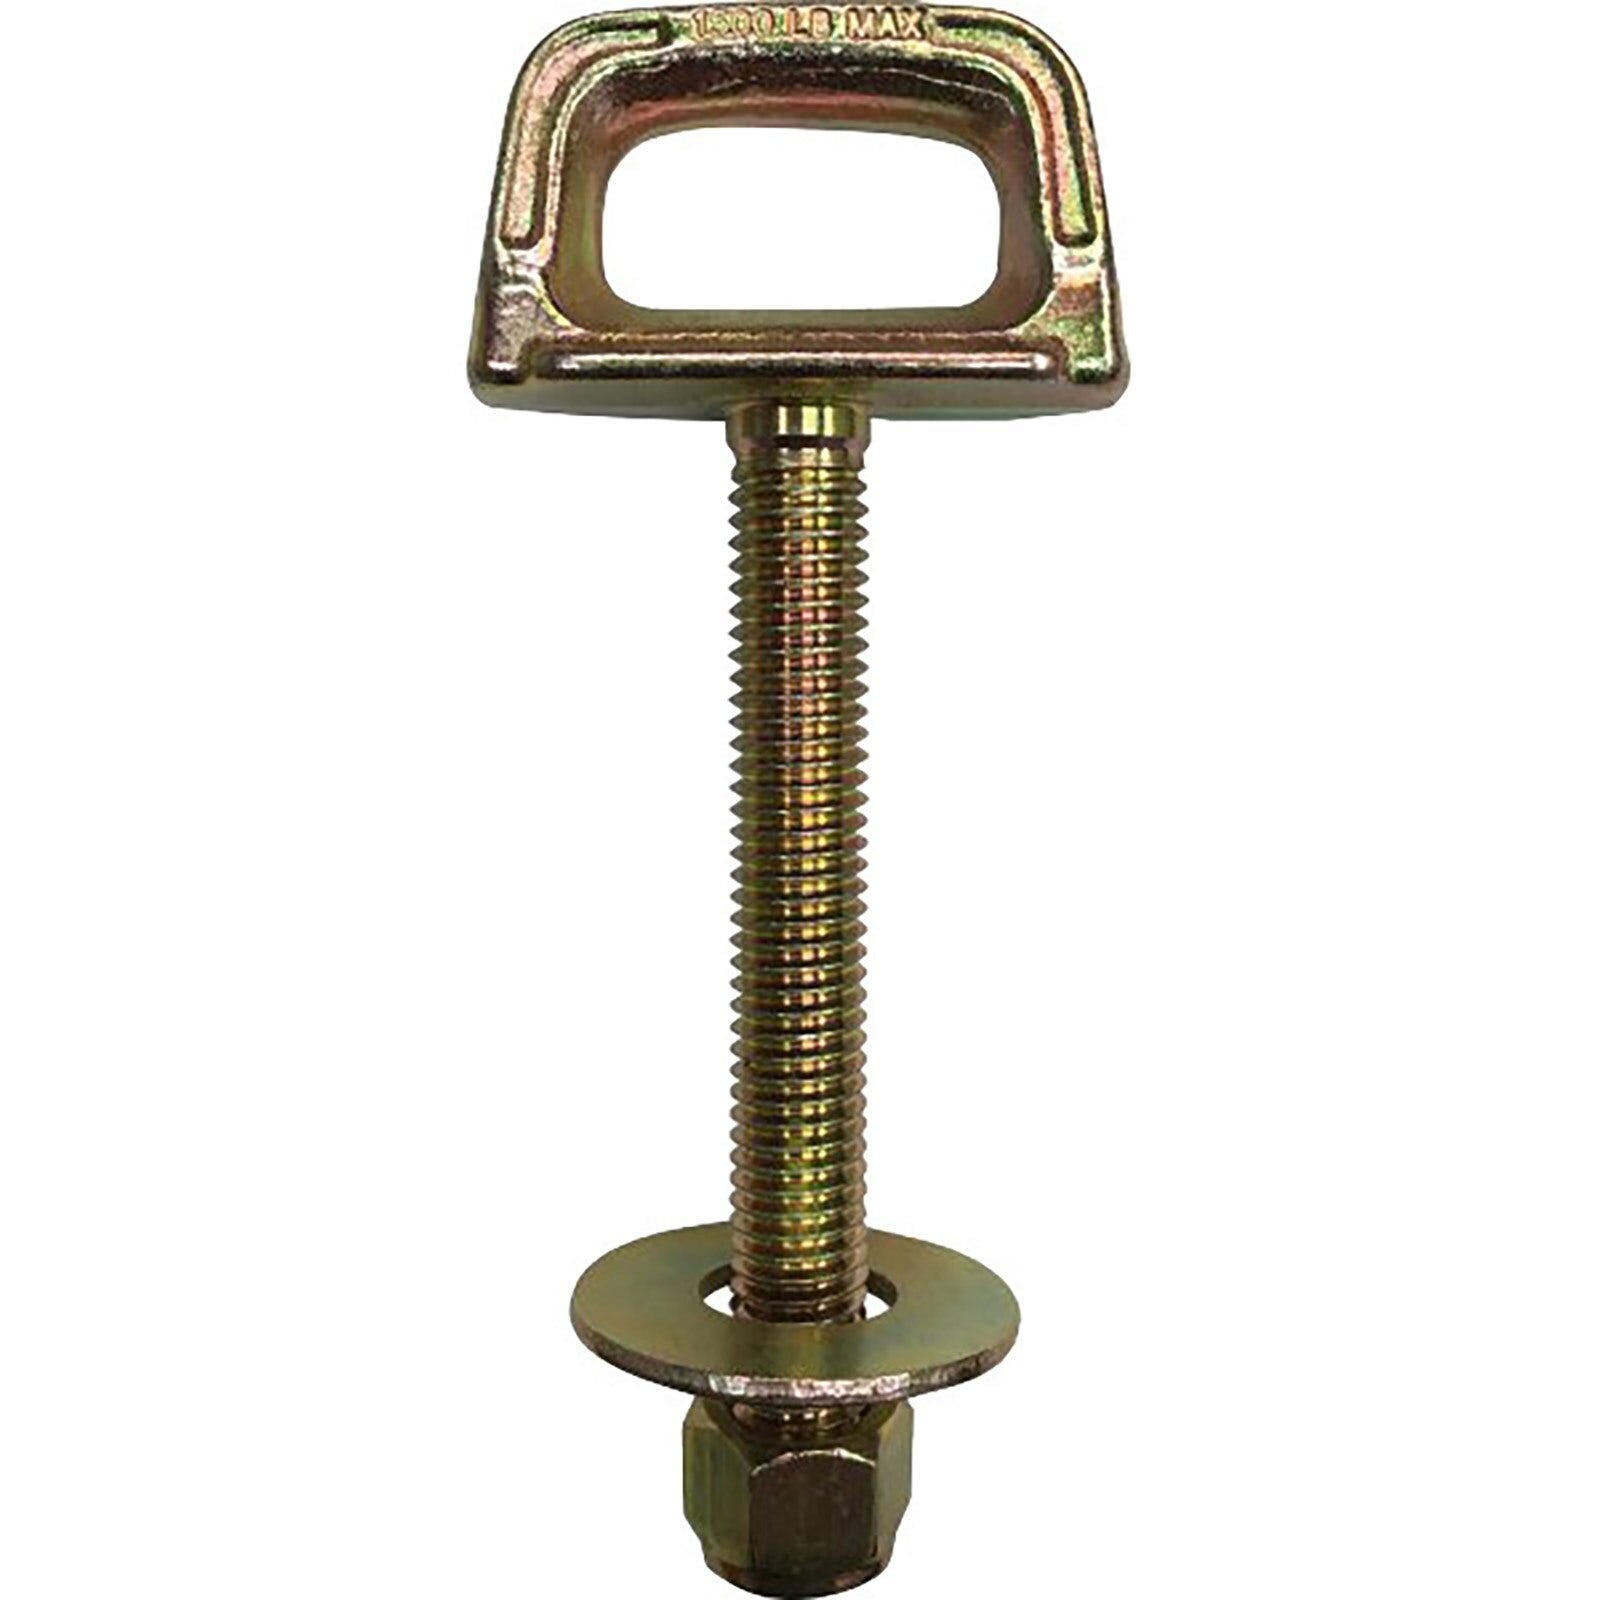 Screw Style Deck Hook - 860200994 - The Parts Lodge